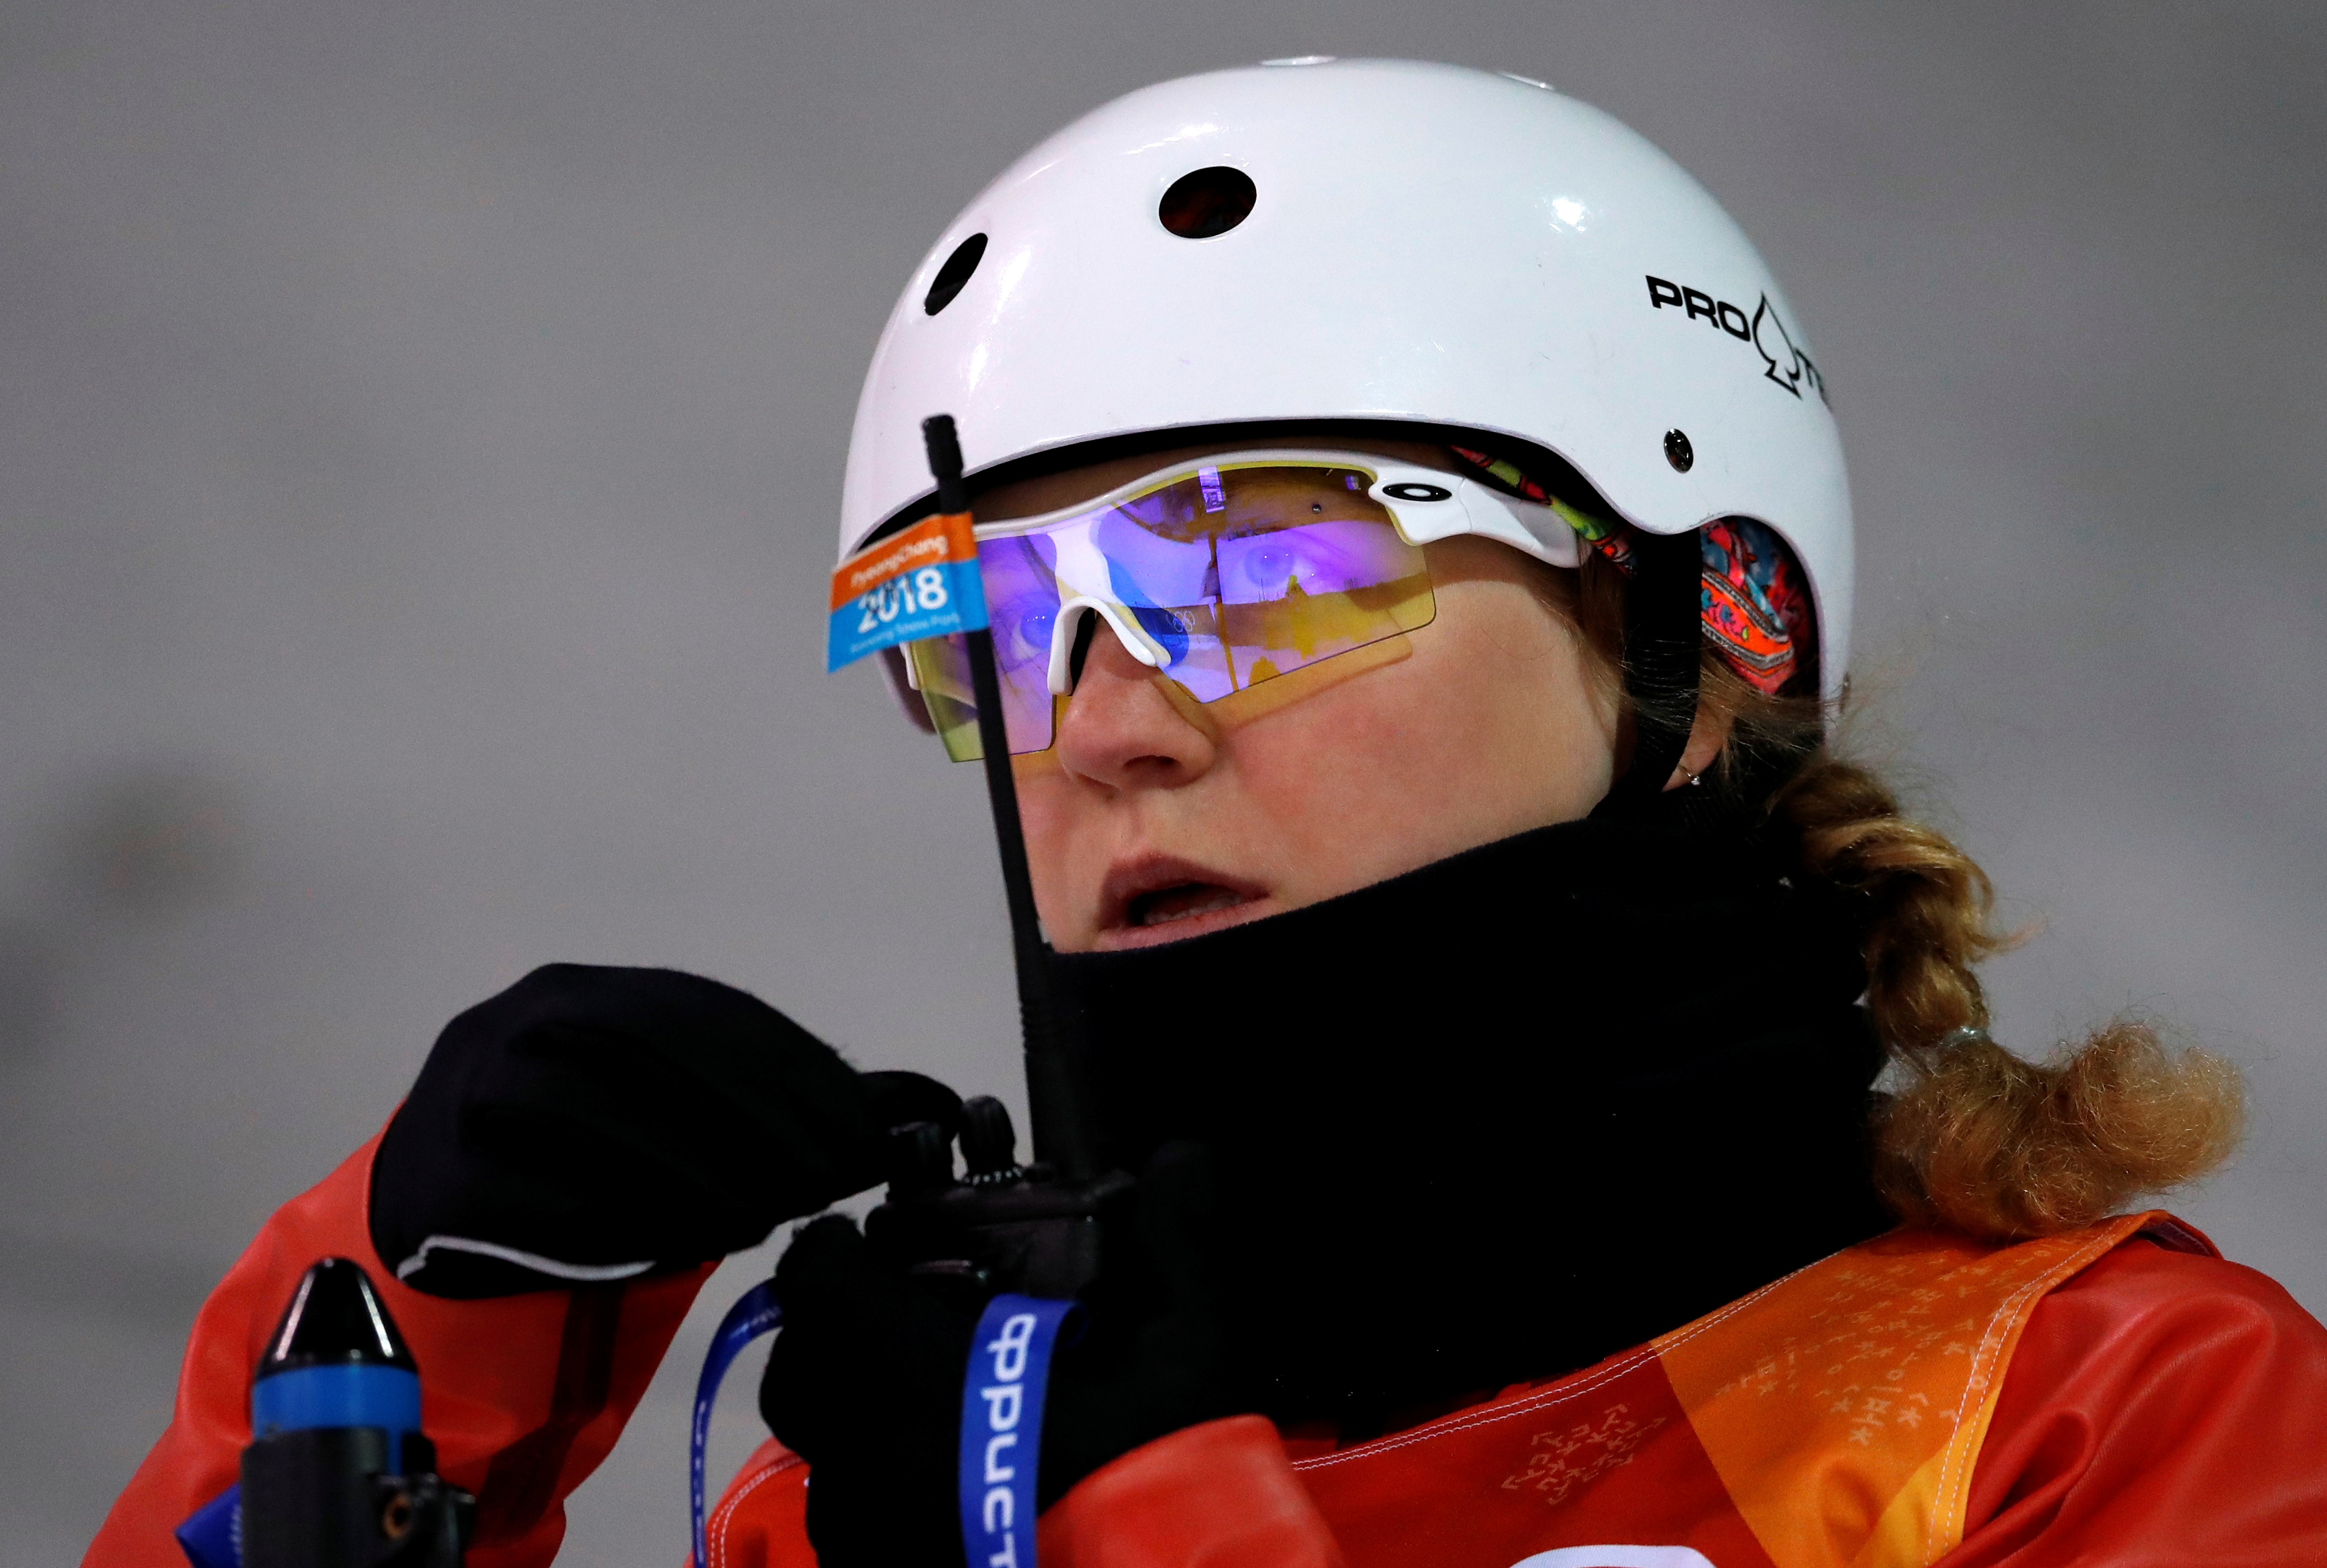 Belarus detains, fines Olympic skier for laws Reuters